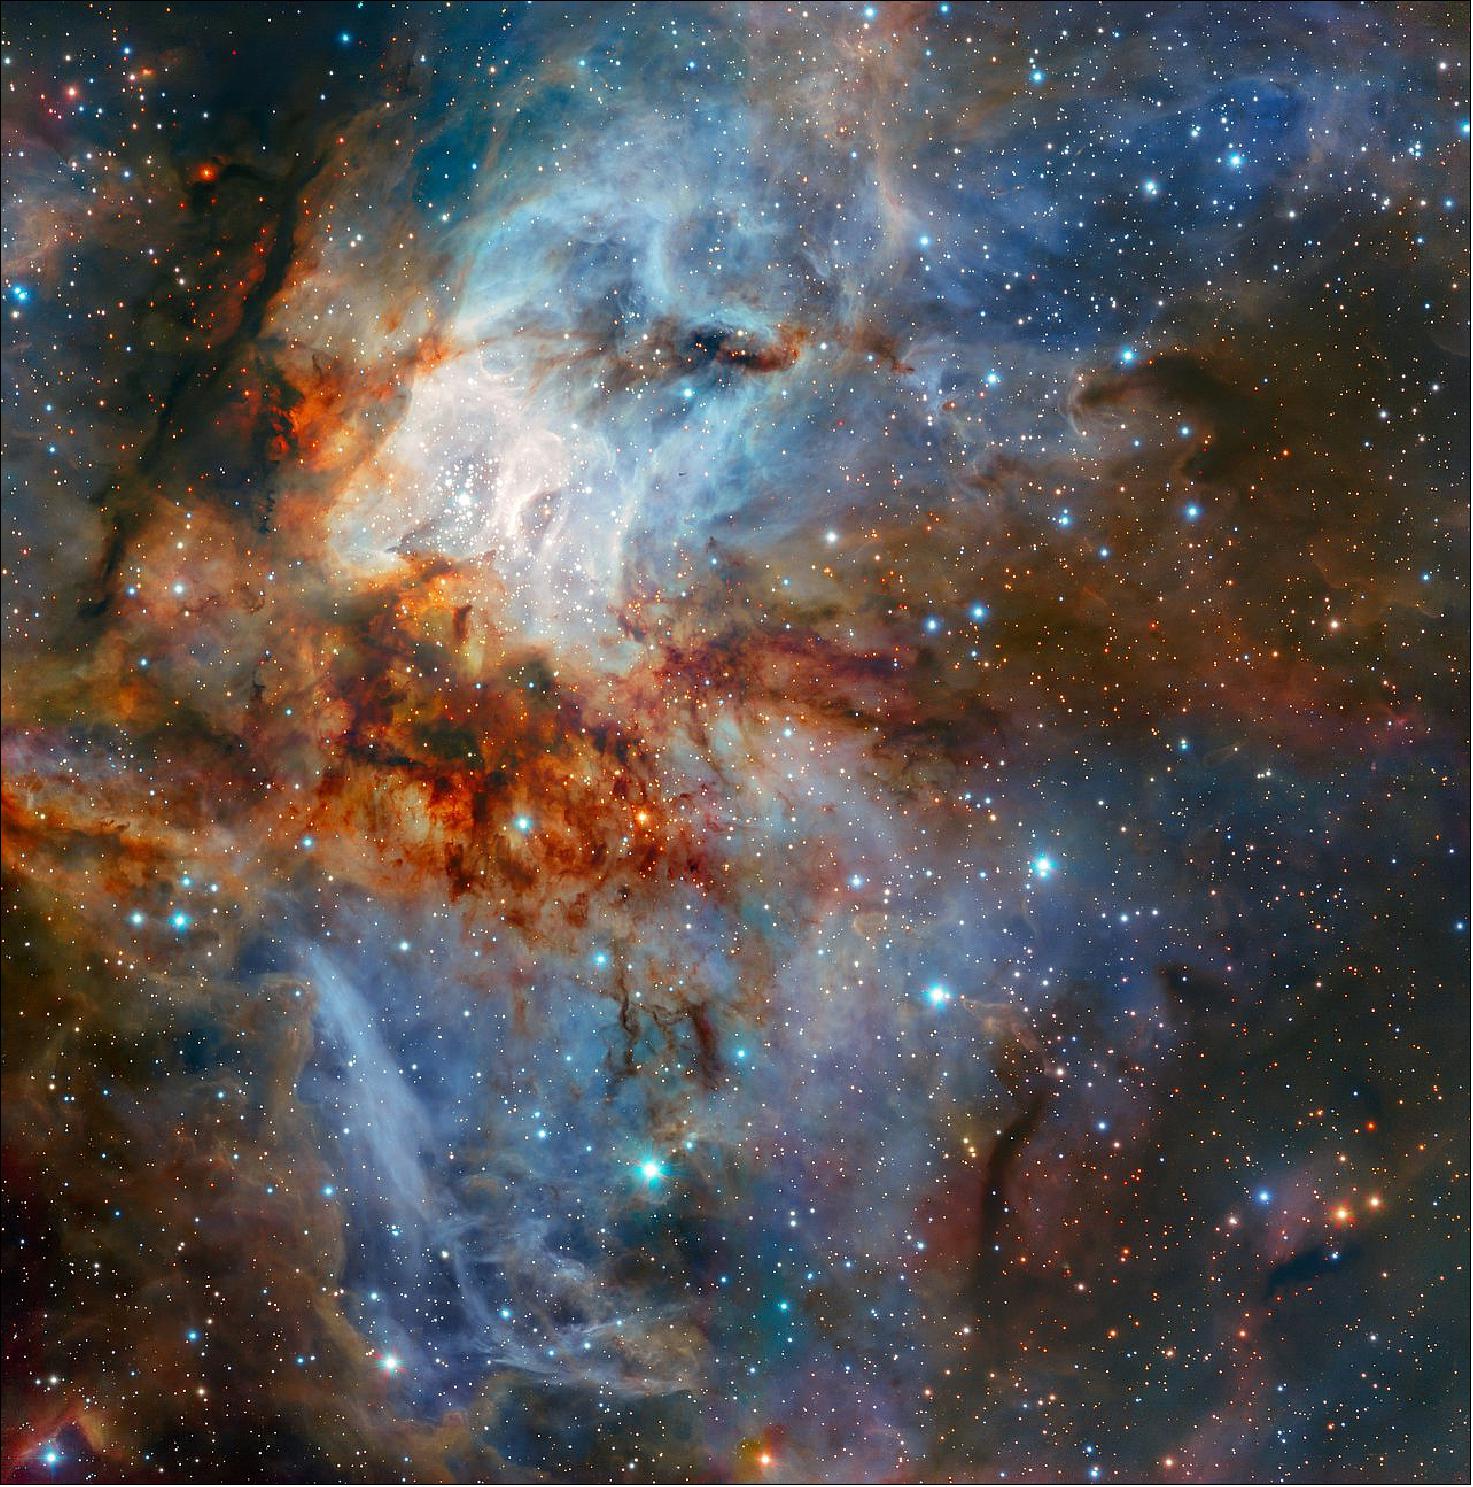 Figure 70: This image shows the star cluster RCW 38, as captured by the HAWK-I infrared imager mounted on ESO’s VLT (Very Large Telescope) in Chile. By gazing into infrared wavelengths, HAWK-I can examine dust-shrouded star clusters like RCW 38, providing an unparalleled view of the stars forming within. This cluster contains hundreds of young, hot, massive stars, and lies some 5500 light-years away in the constellation of Vela (The Sails), image credit: